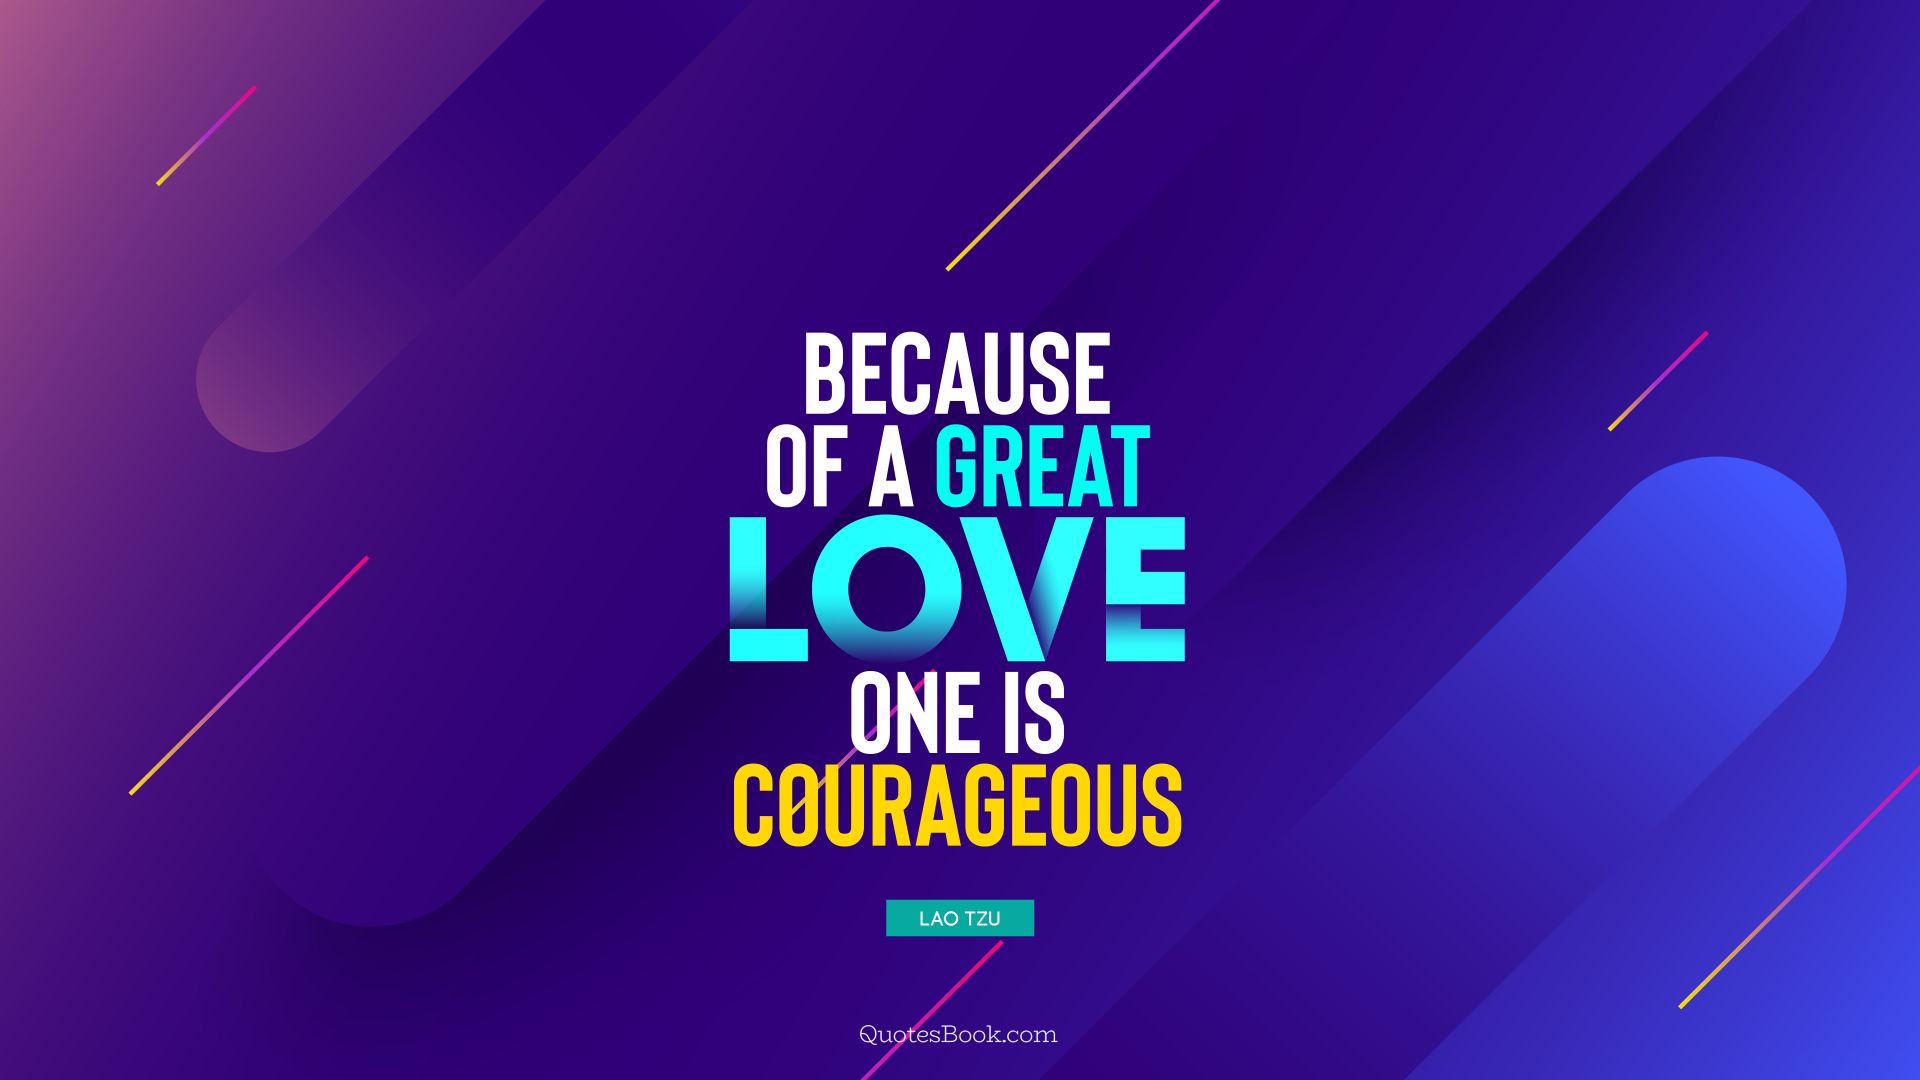 Because of a great love, one is courageous. - Quote by Lao Tzu